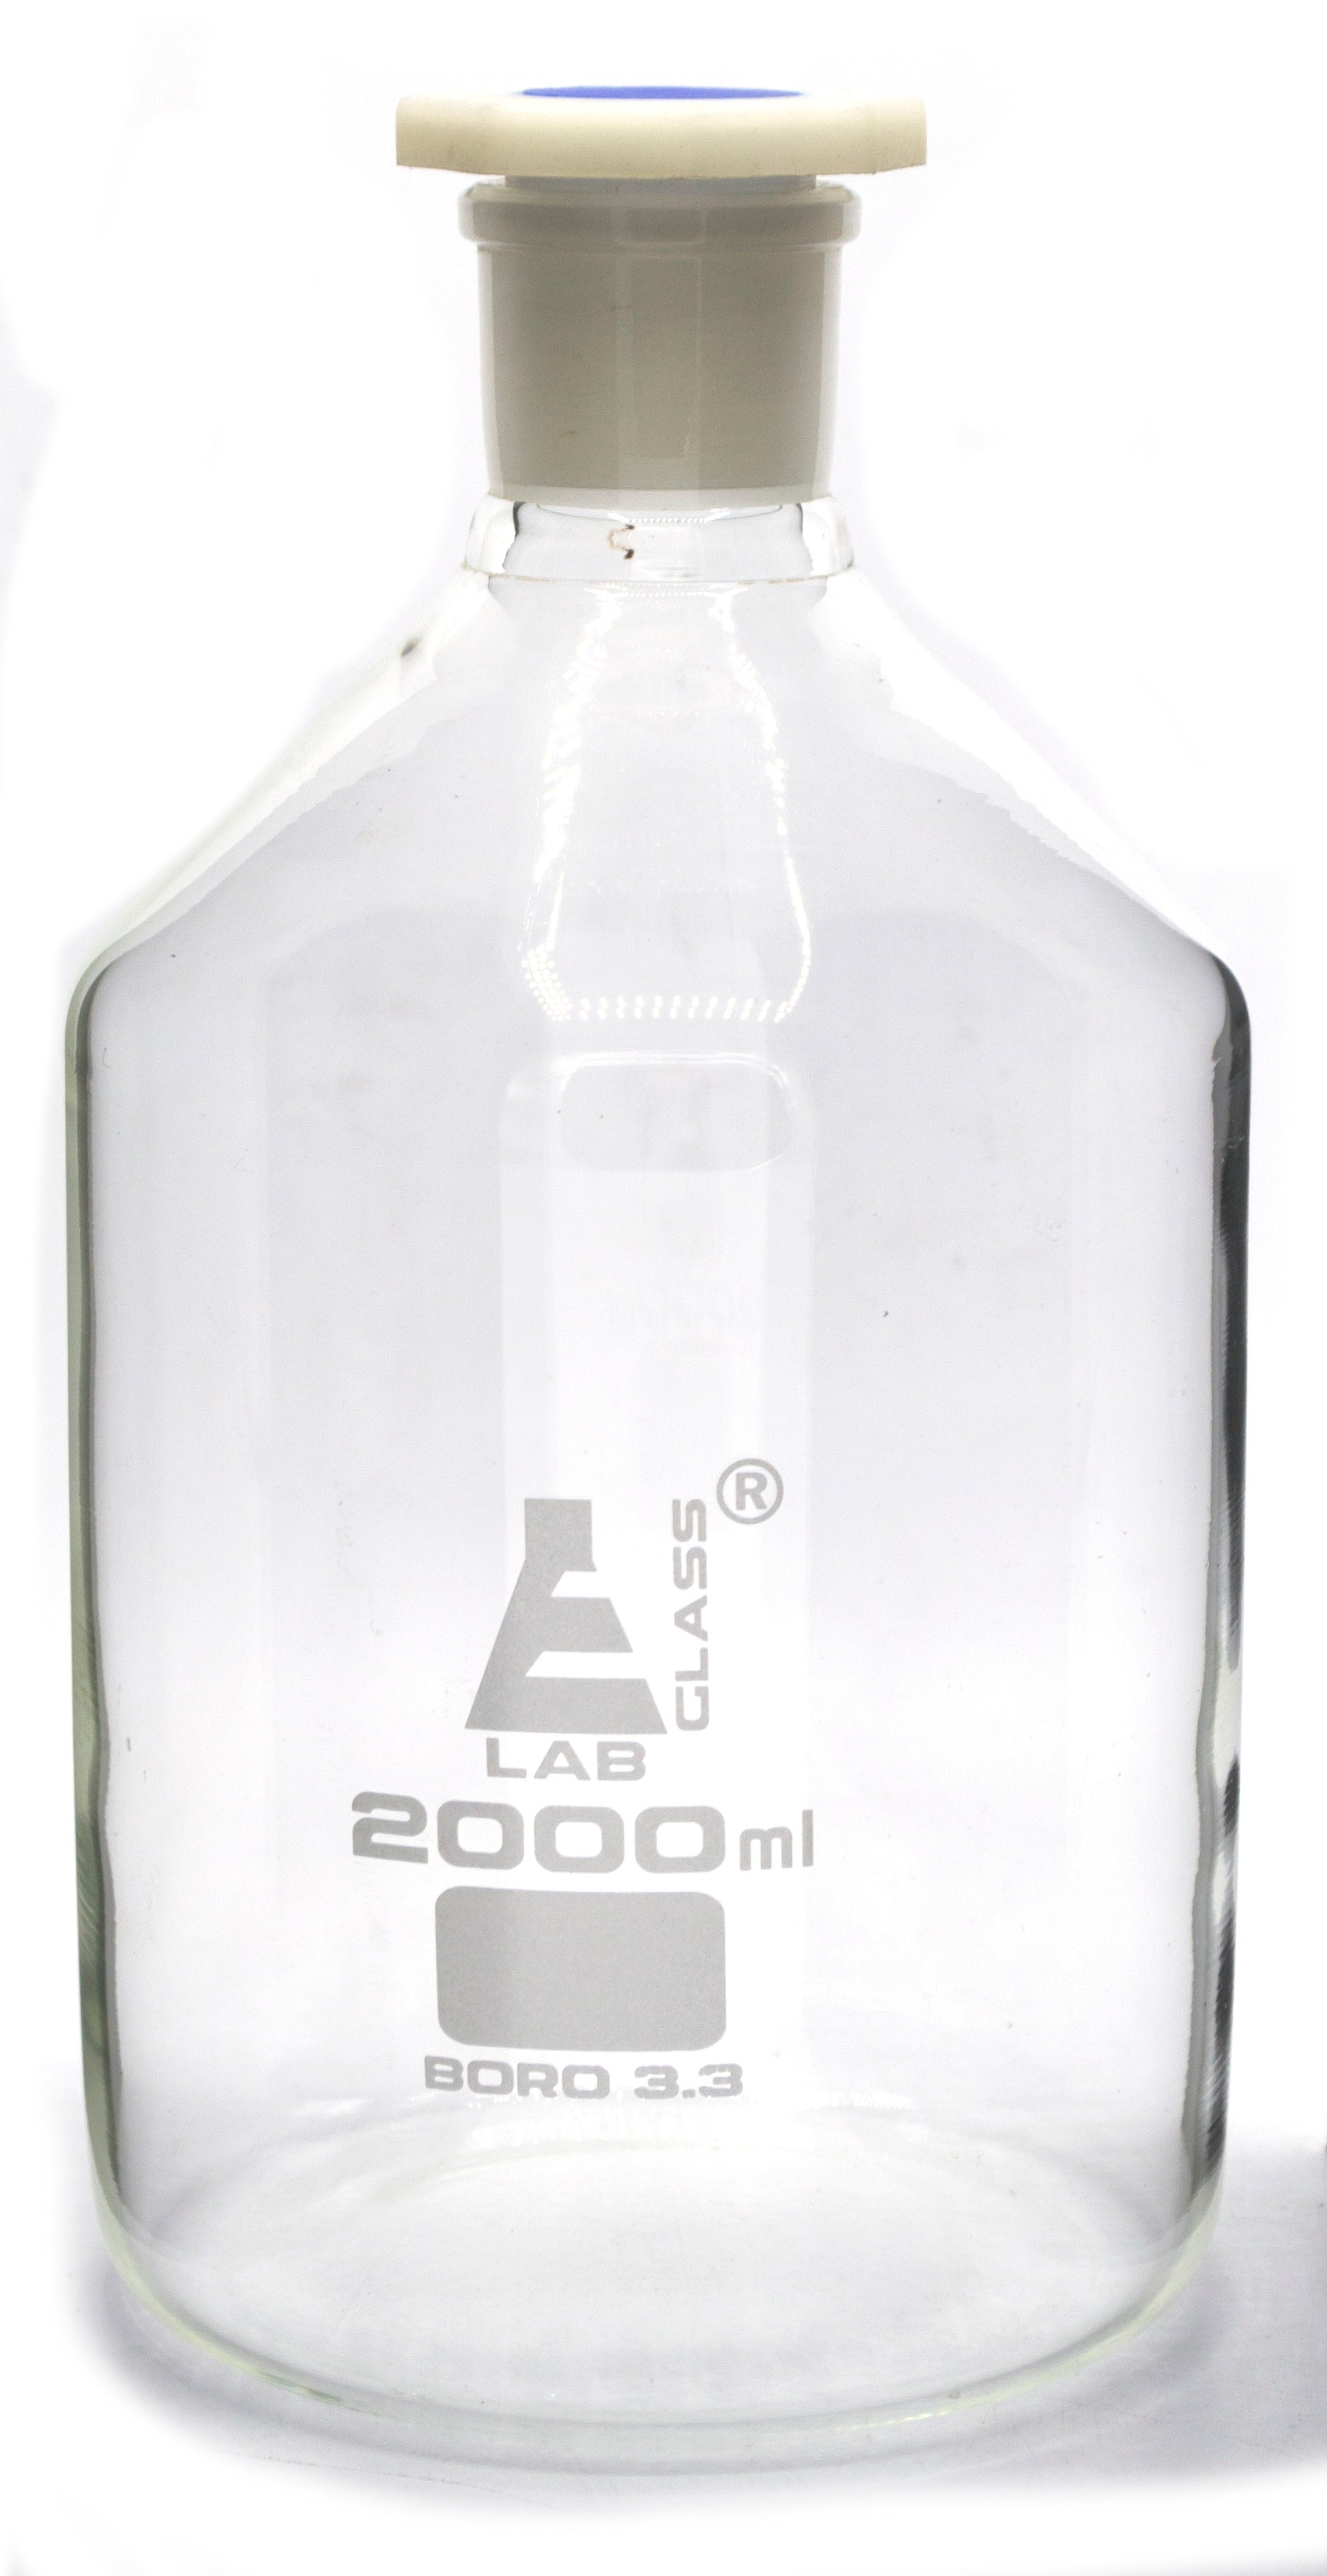 Clear Borosilicate Glass Reagent Bottle with Polyethylene Stopper, 2000 ml, Narrow Mouth, Autoclavable